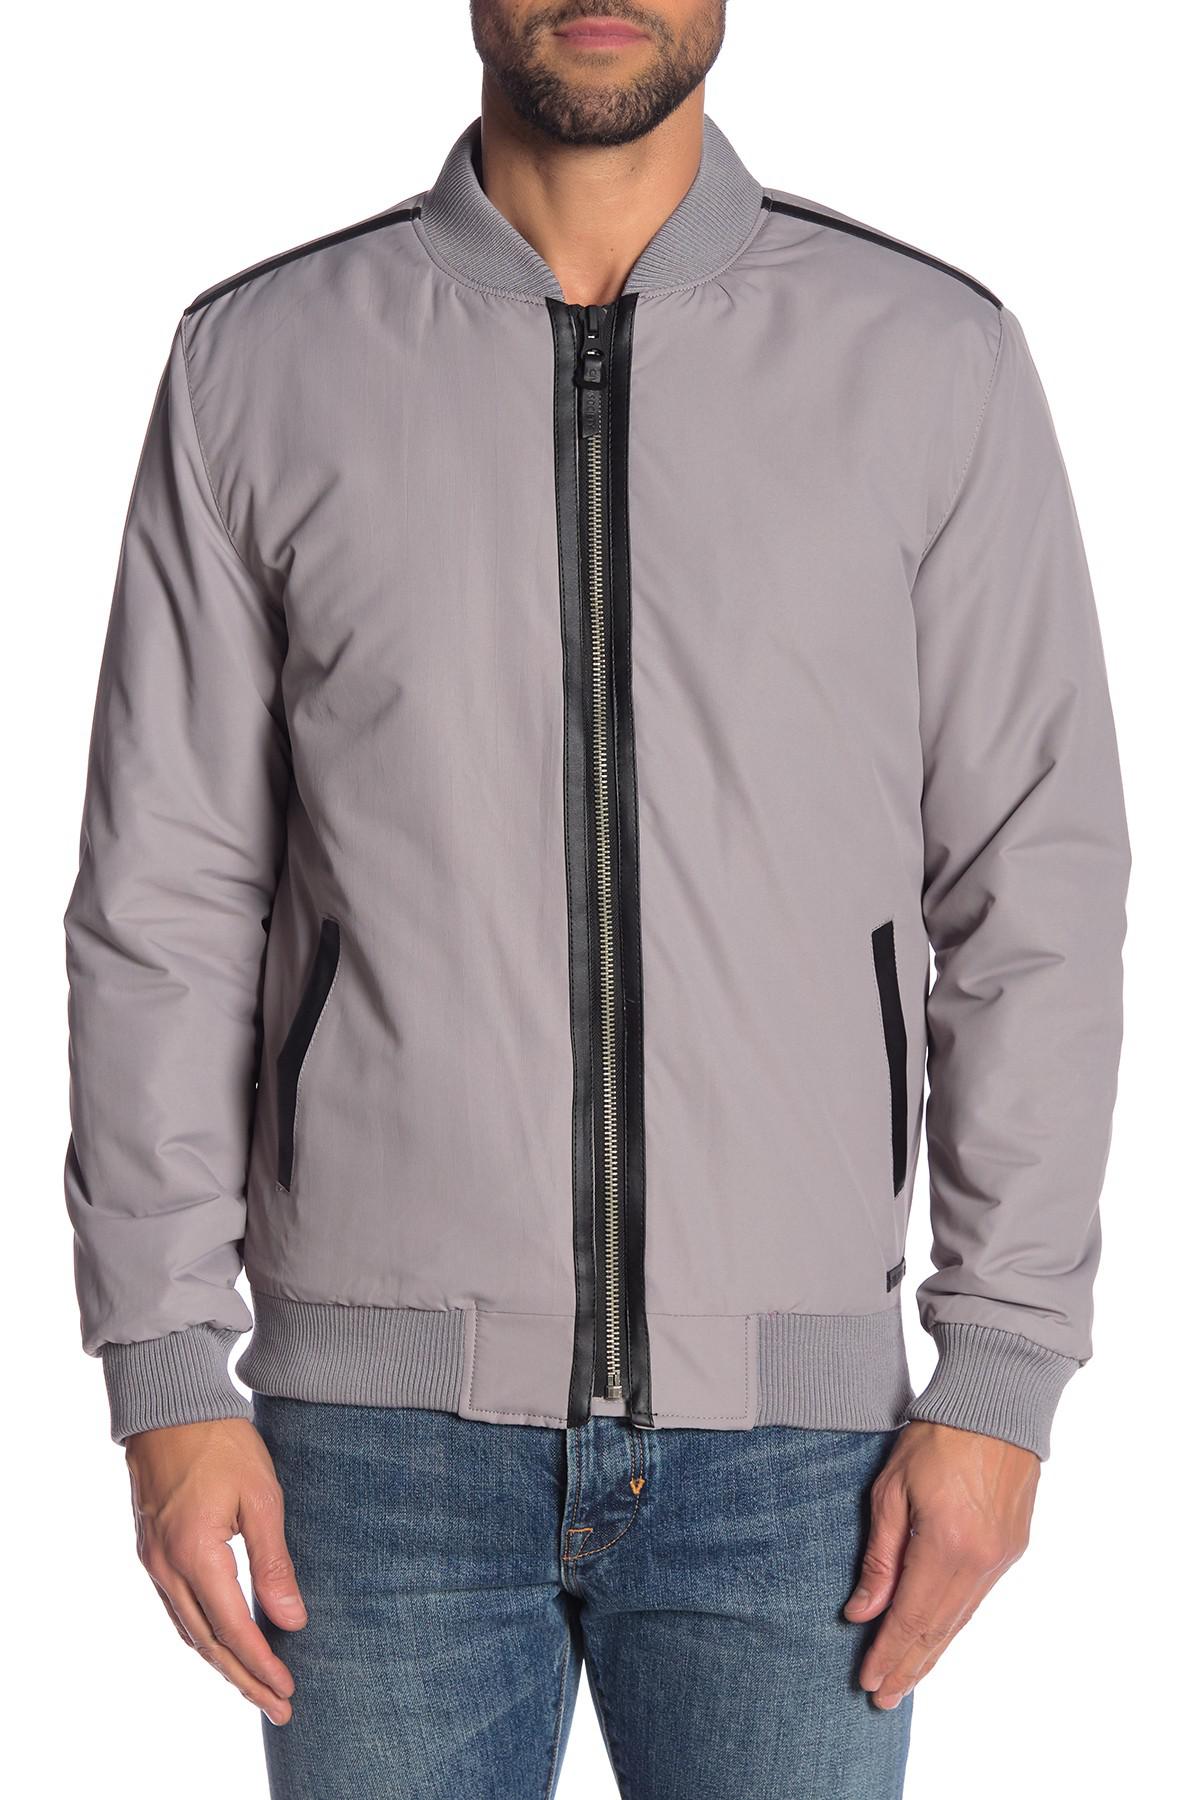 Civil Society Synthetic Rothco Bomber Jacket in Gray for Men - Lyst